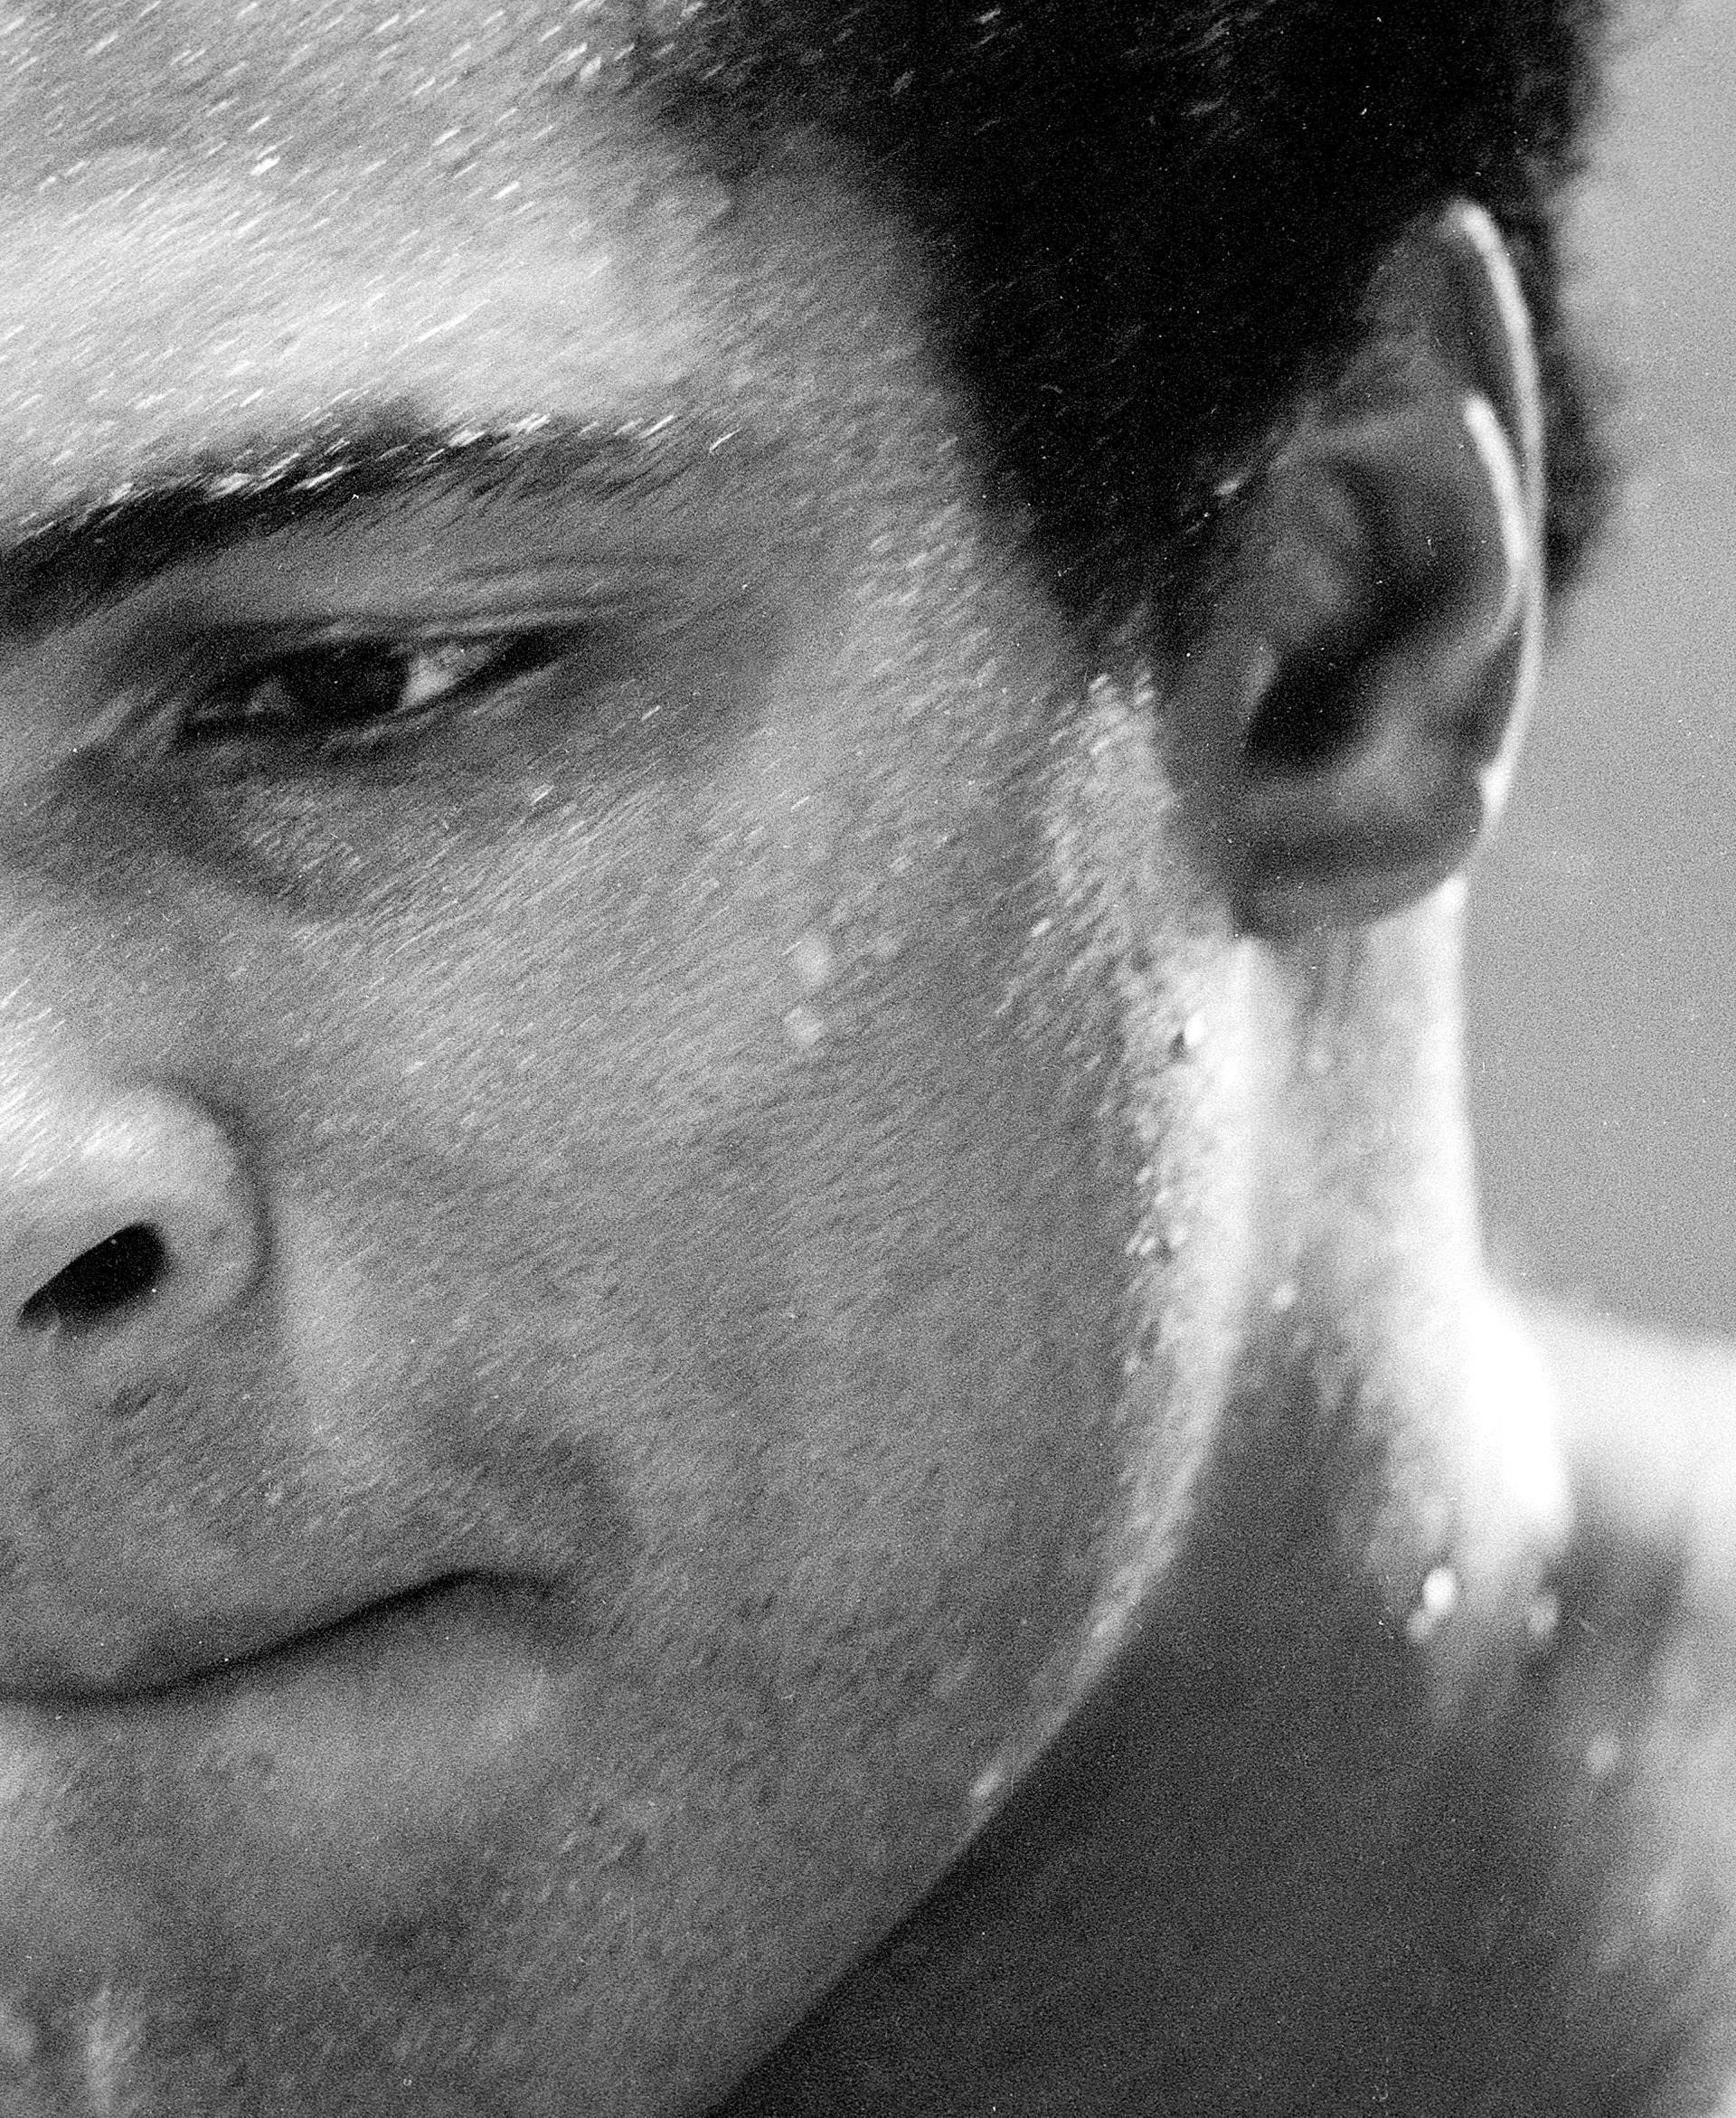 Muhammad Ali (formerly Cassius Clay) trains at his Pennsylvanian mountain retreat in Owigsburg